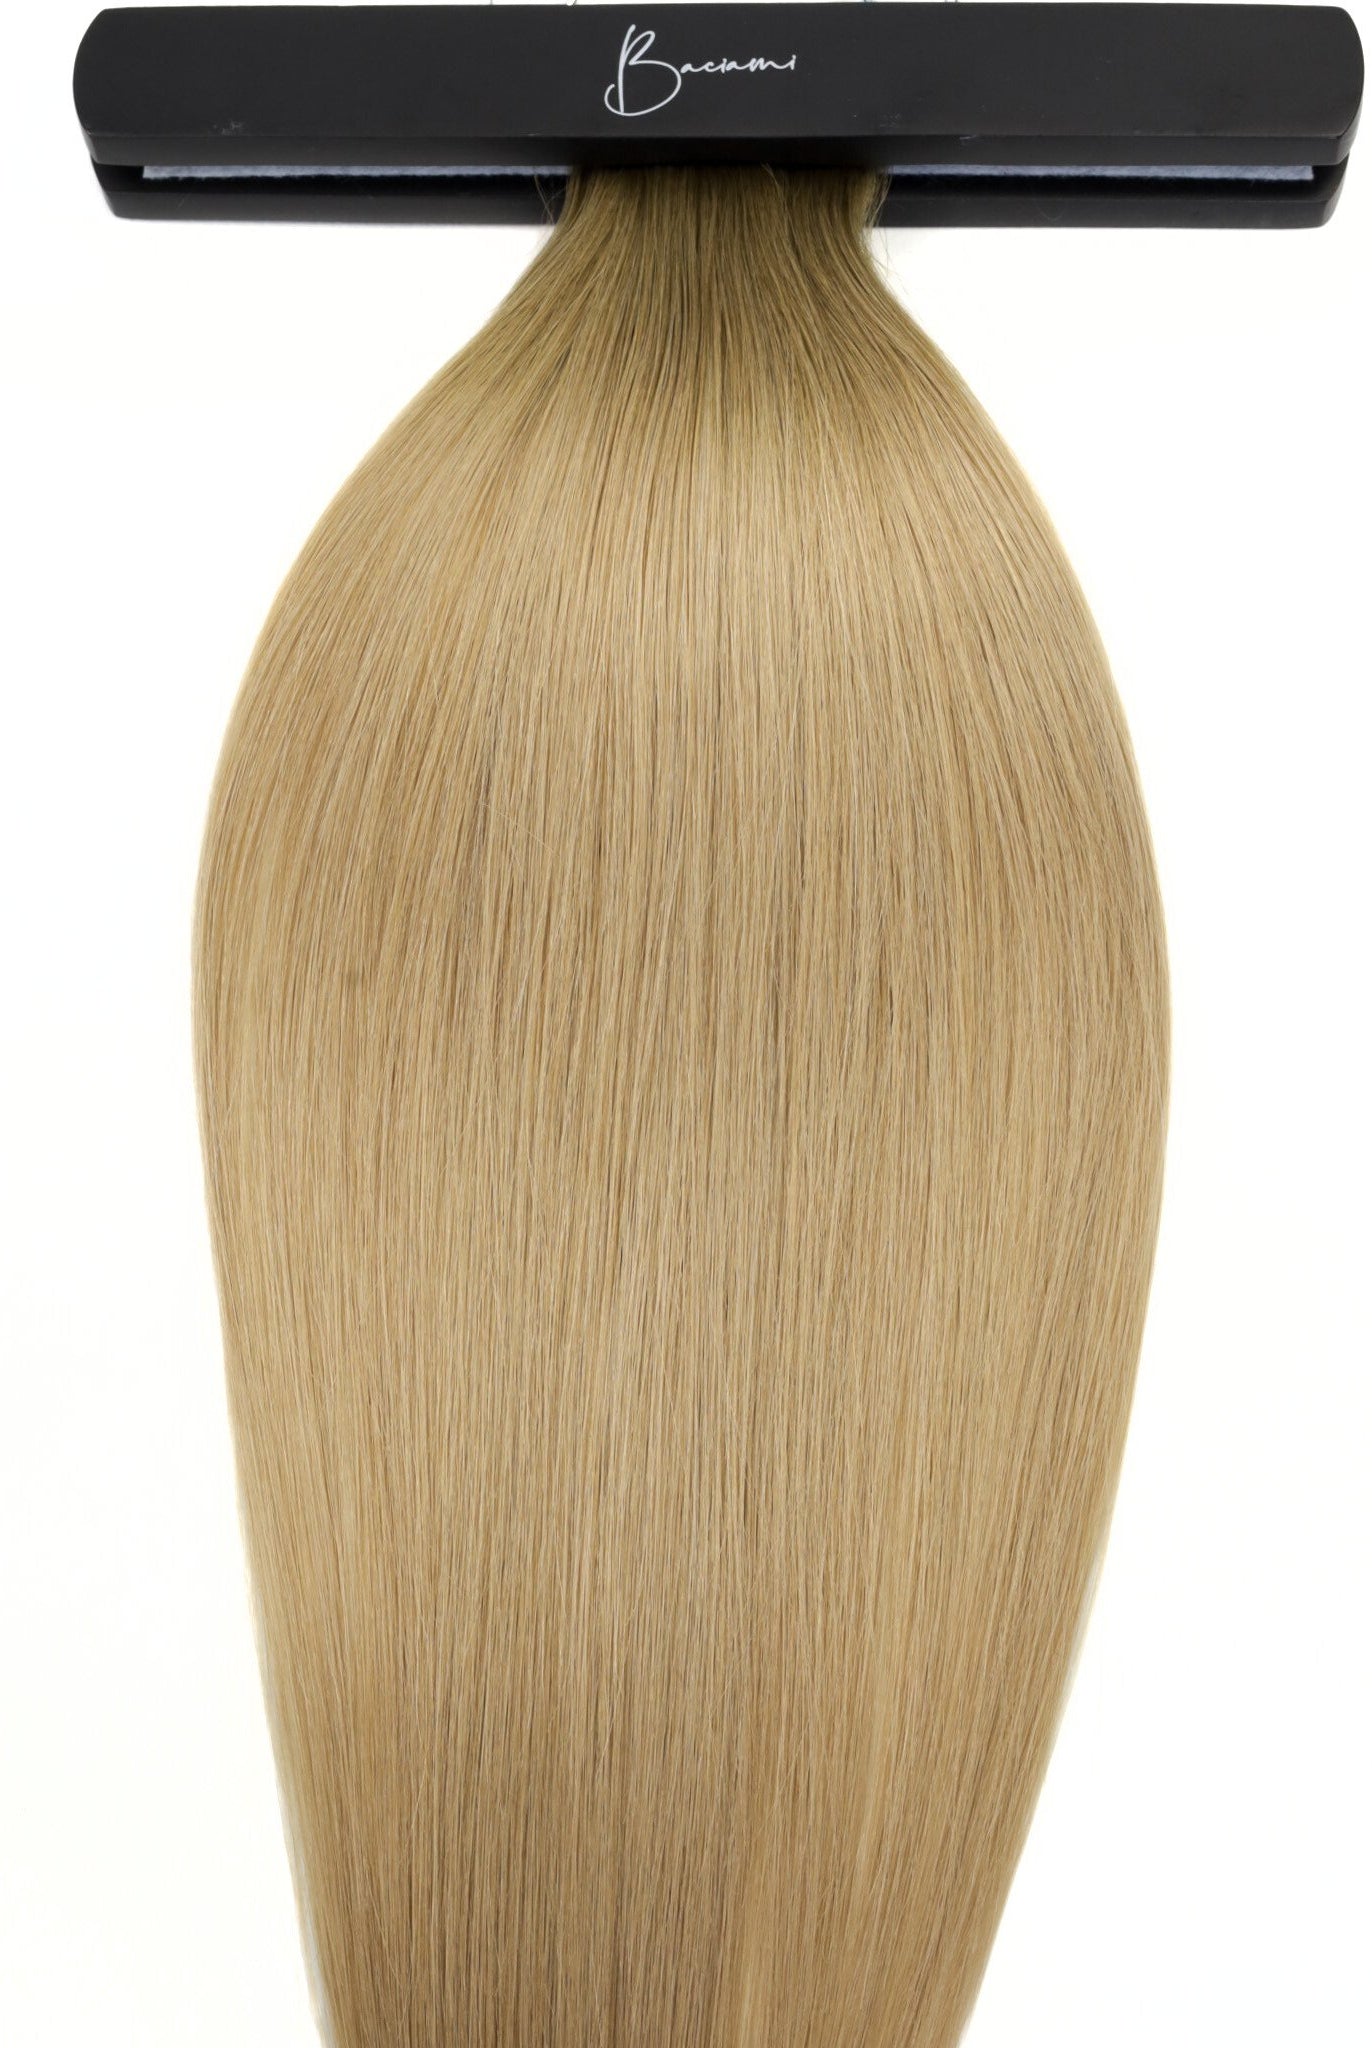 Athena (root smudge) - Genius weft - Baciami® Hair Extensions